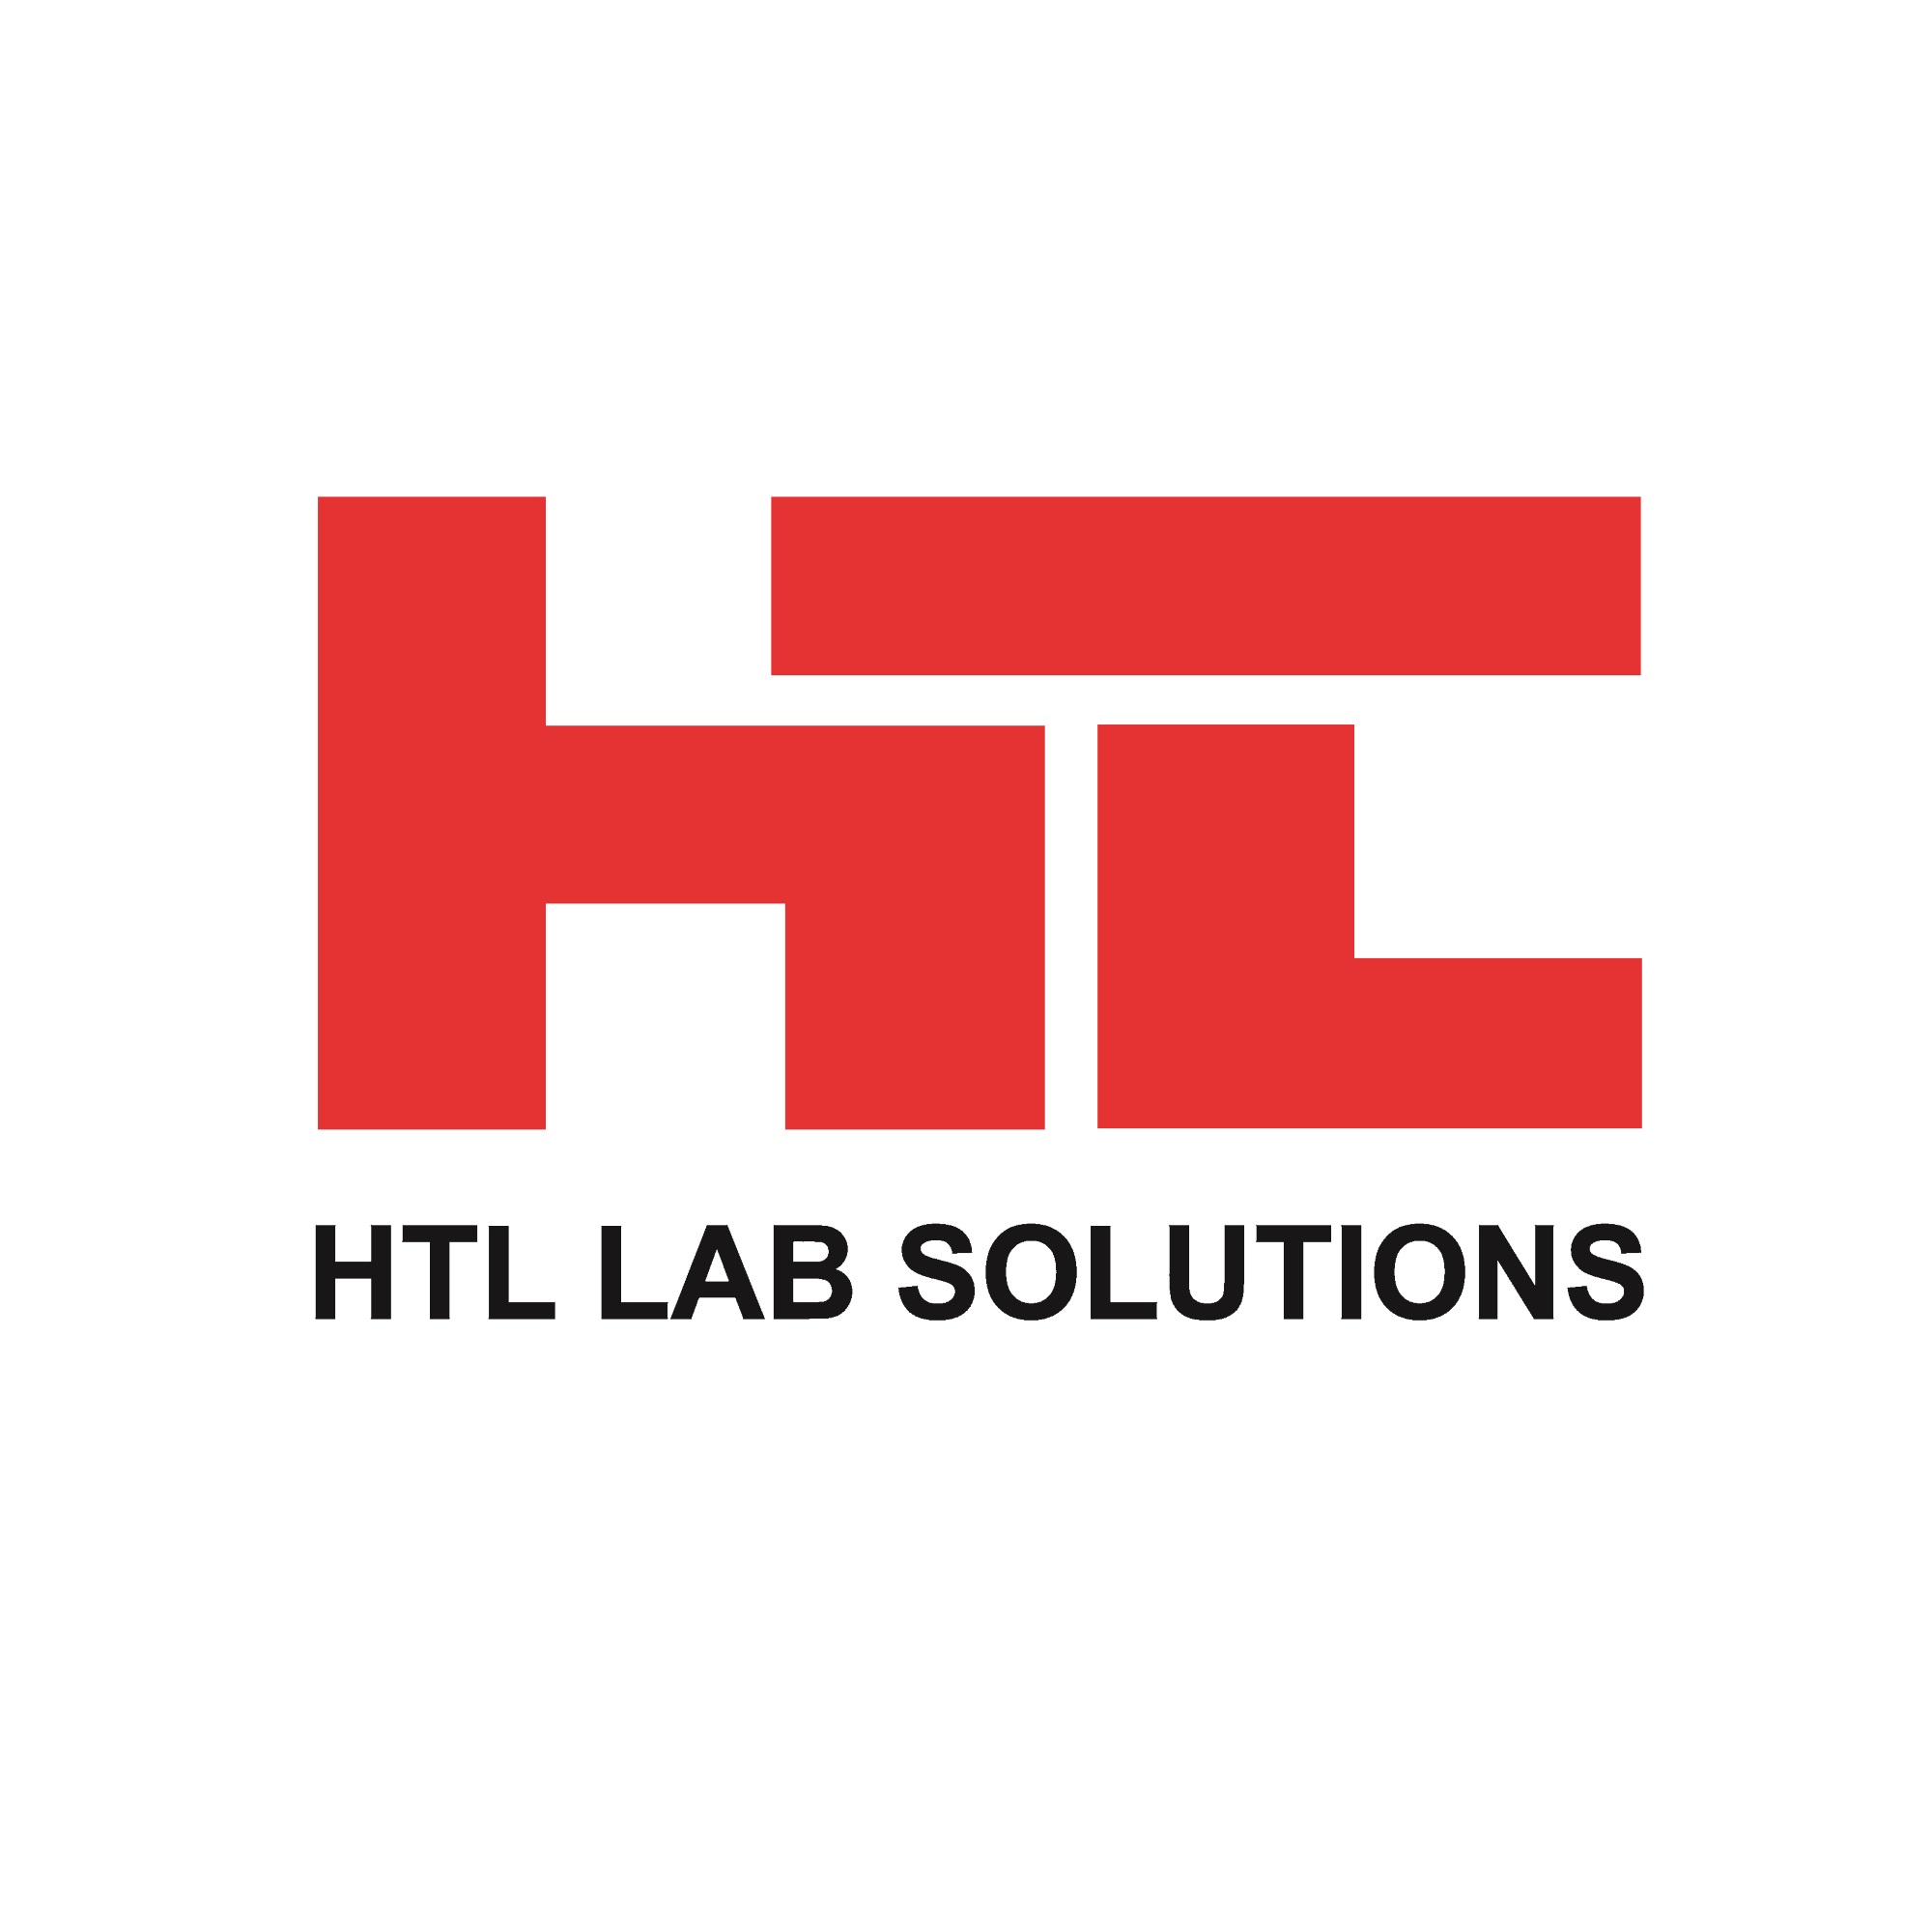  HTL Lab Solutions 